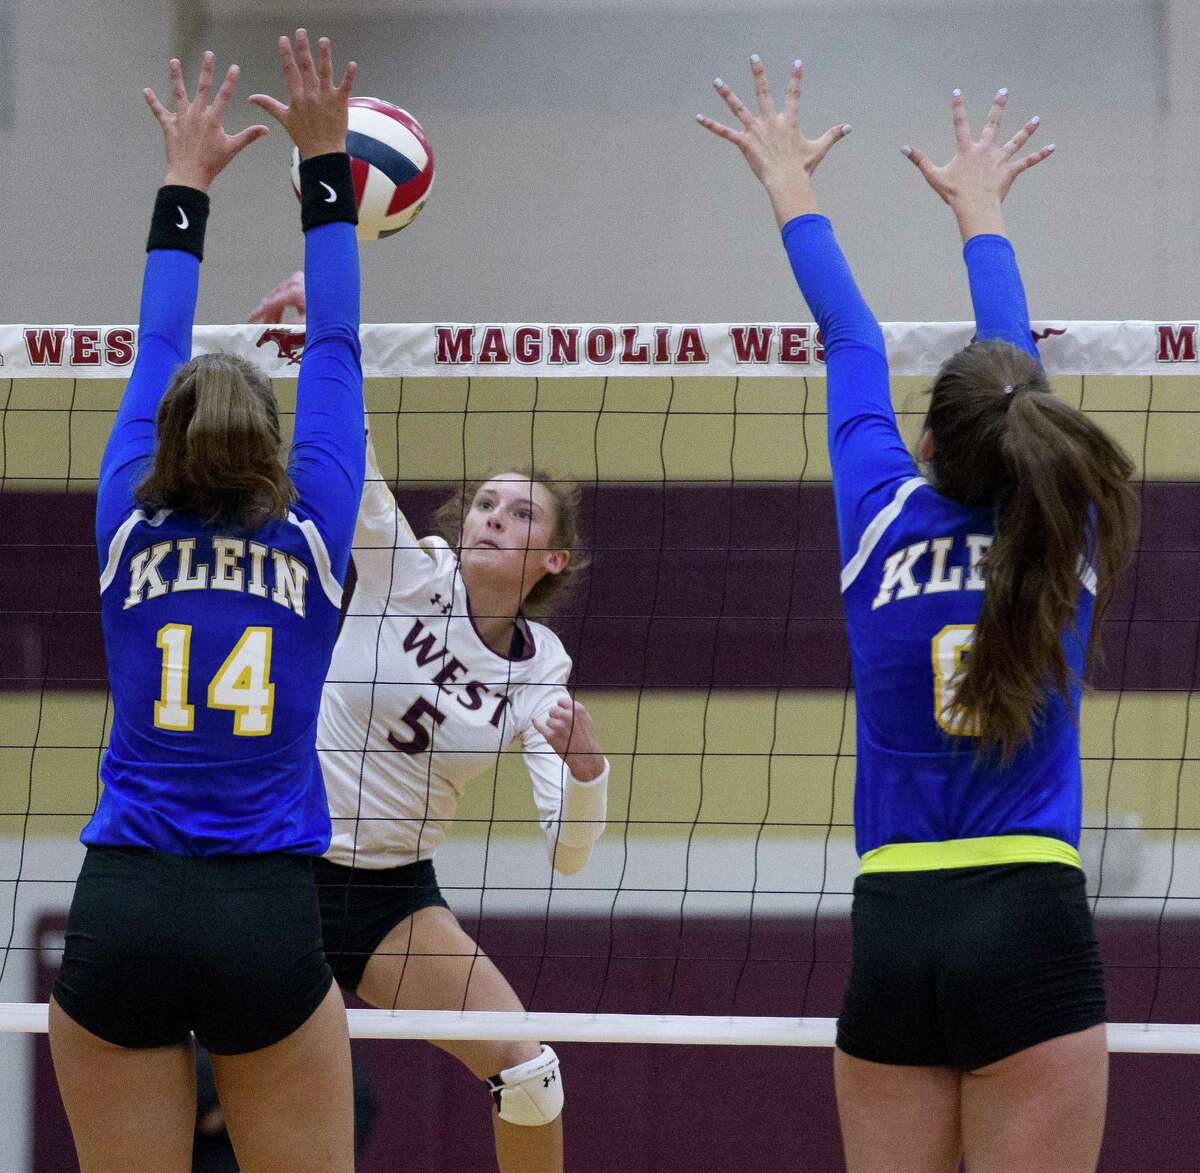 Magnolia West's Peyton Carlyle (5) goes up against Klein's Baylee Laskoskie (14) and Kalee Cadwell (6) during the first set of a non-district volleyball match at Magnolia West High School on Wednesday, Aug. 15, 2018, in Magnolia